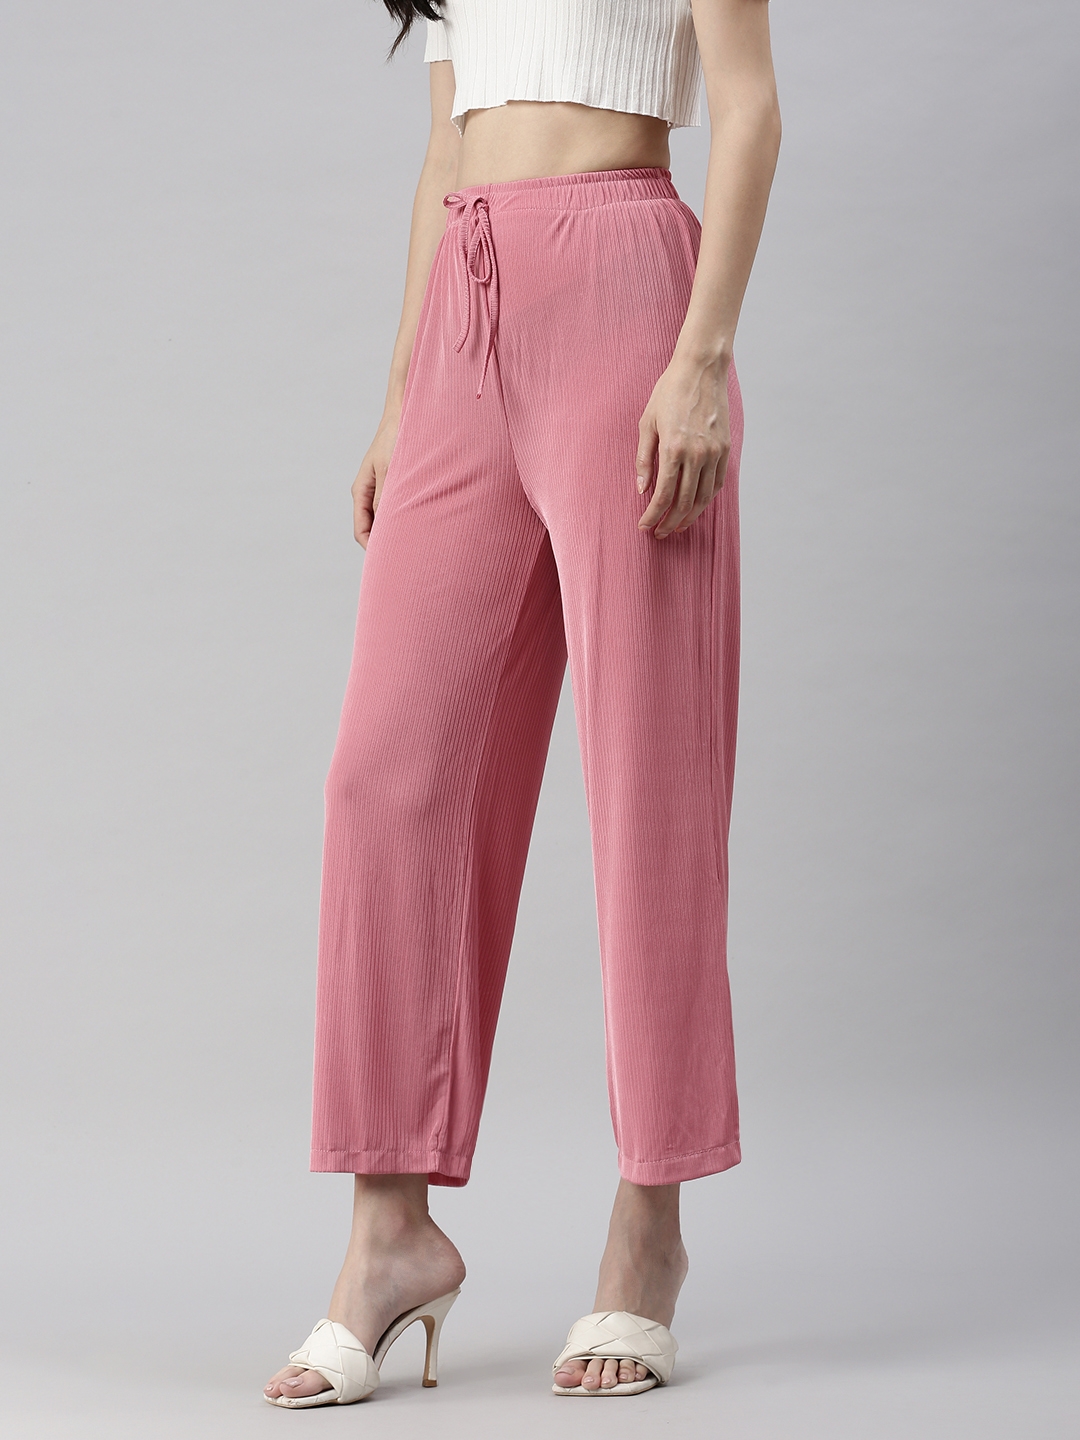 Women's Pink Others Solid Trackpants